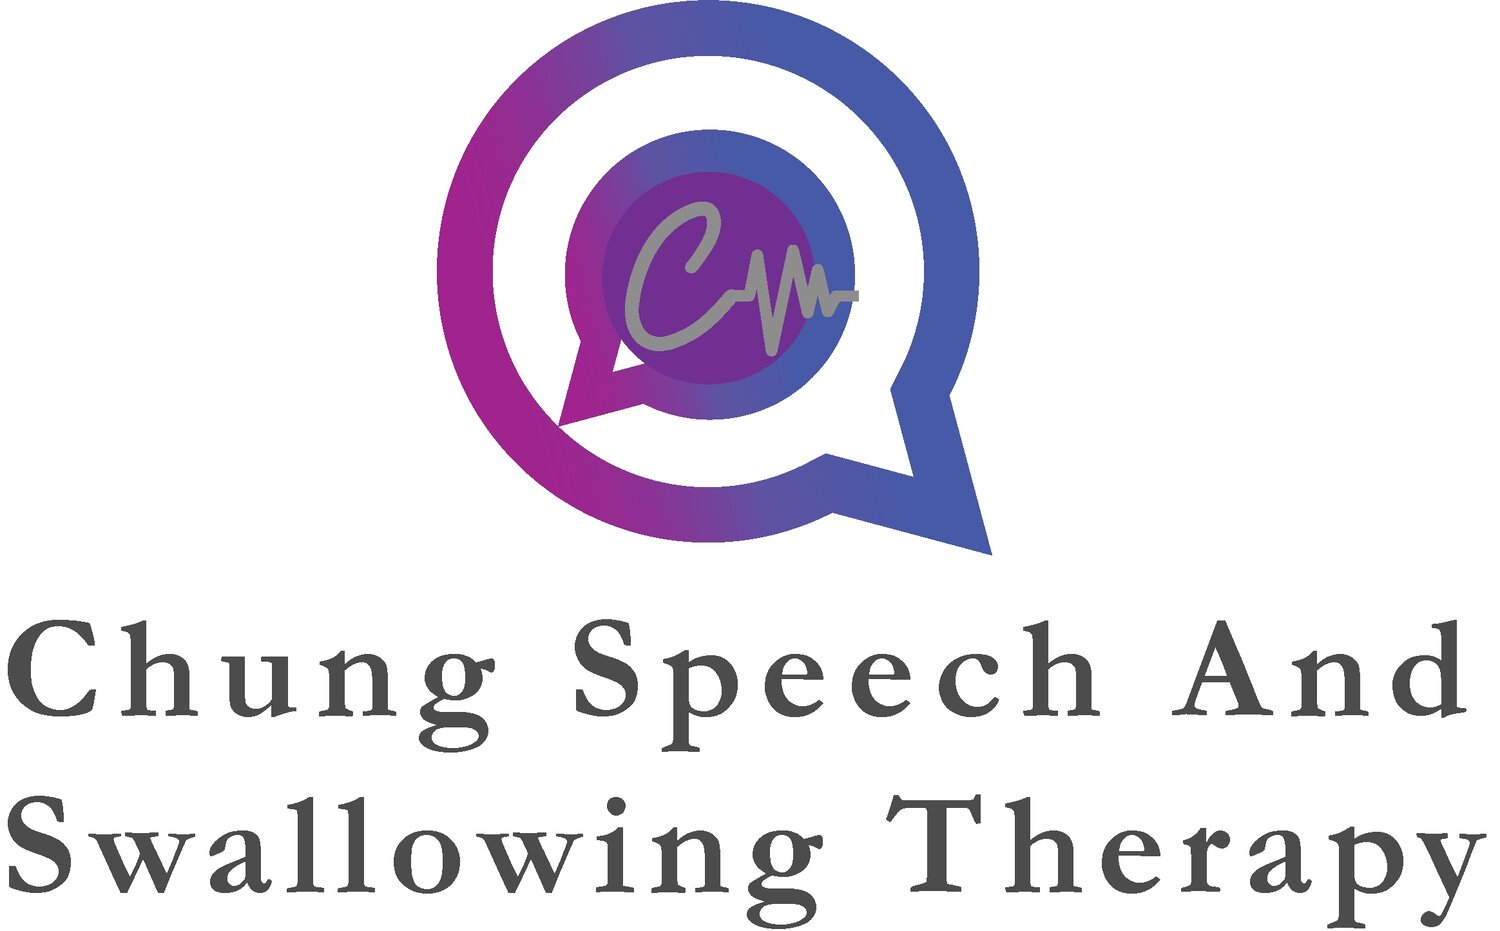 Chung Speech And Swallowing Therapy